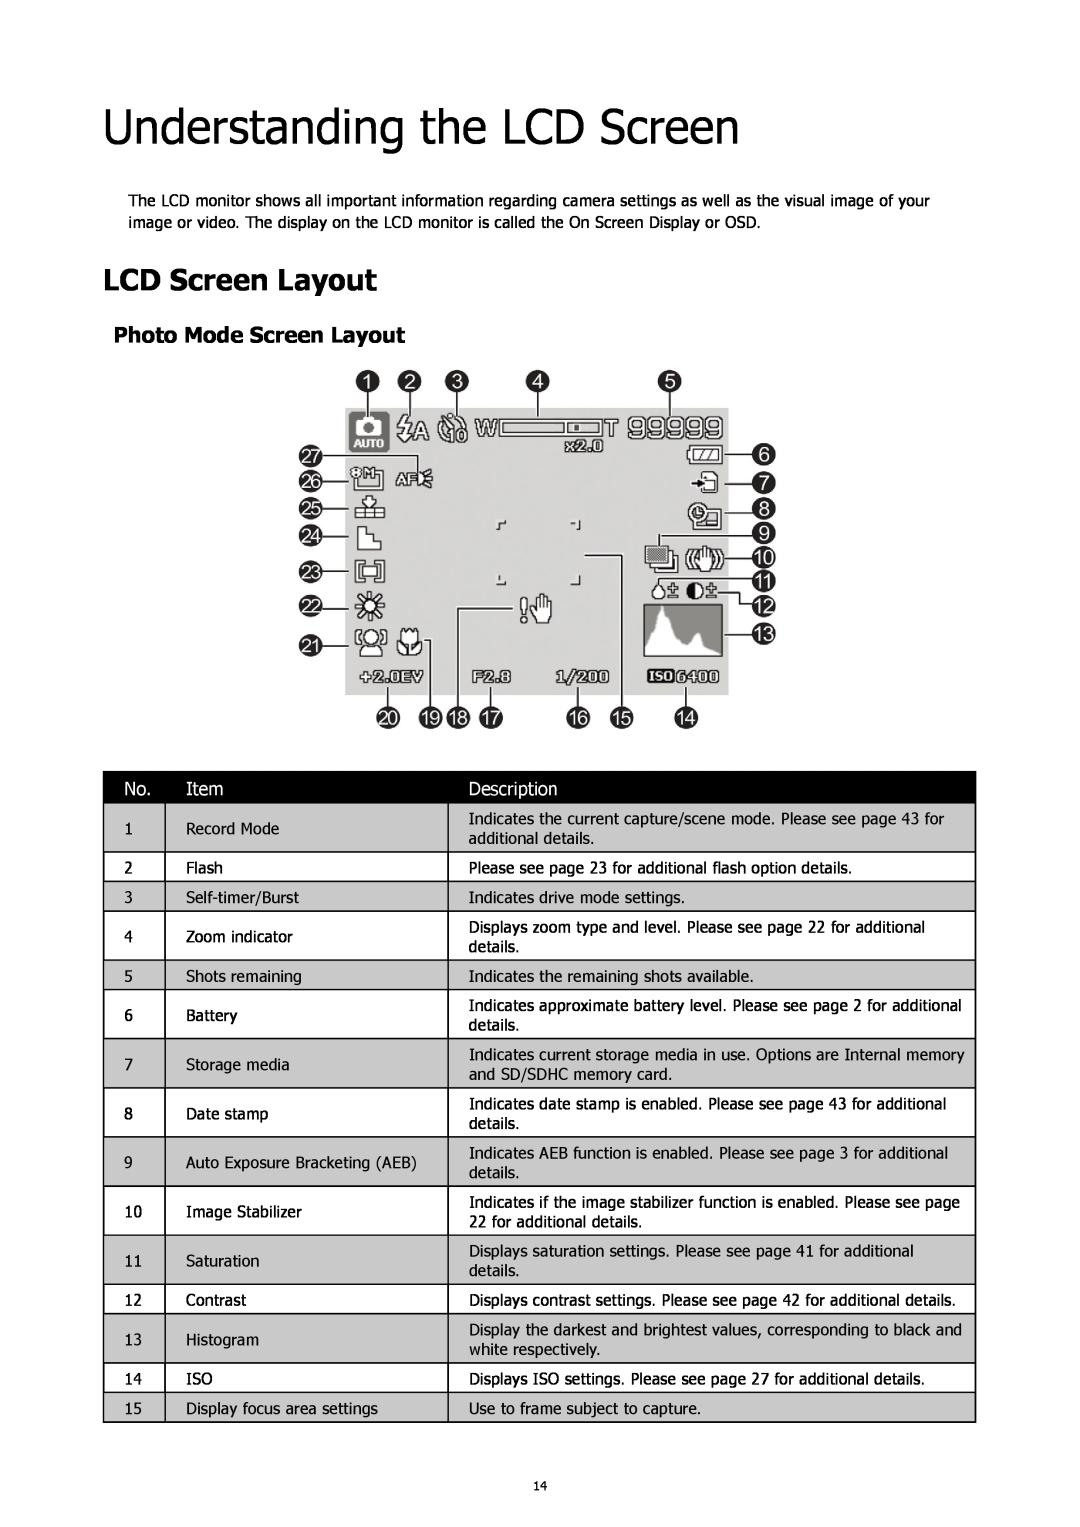 HP SW450 manual Understanding the LCD Screen, LCD Screen Layout, Photo Mode Screen Layout, Description 